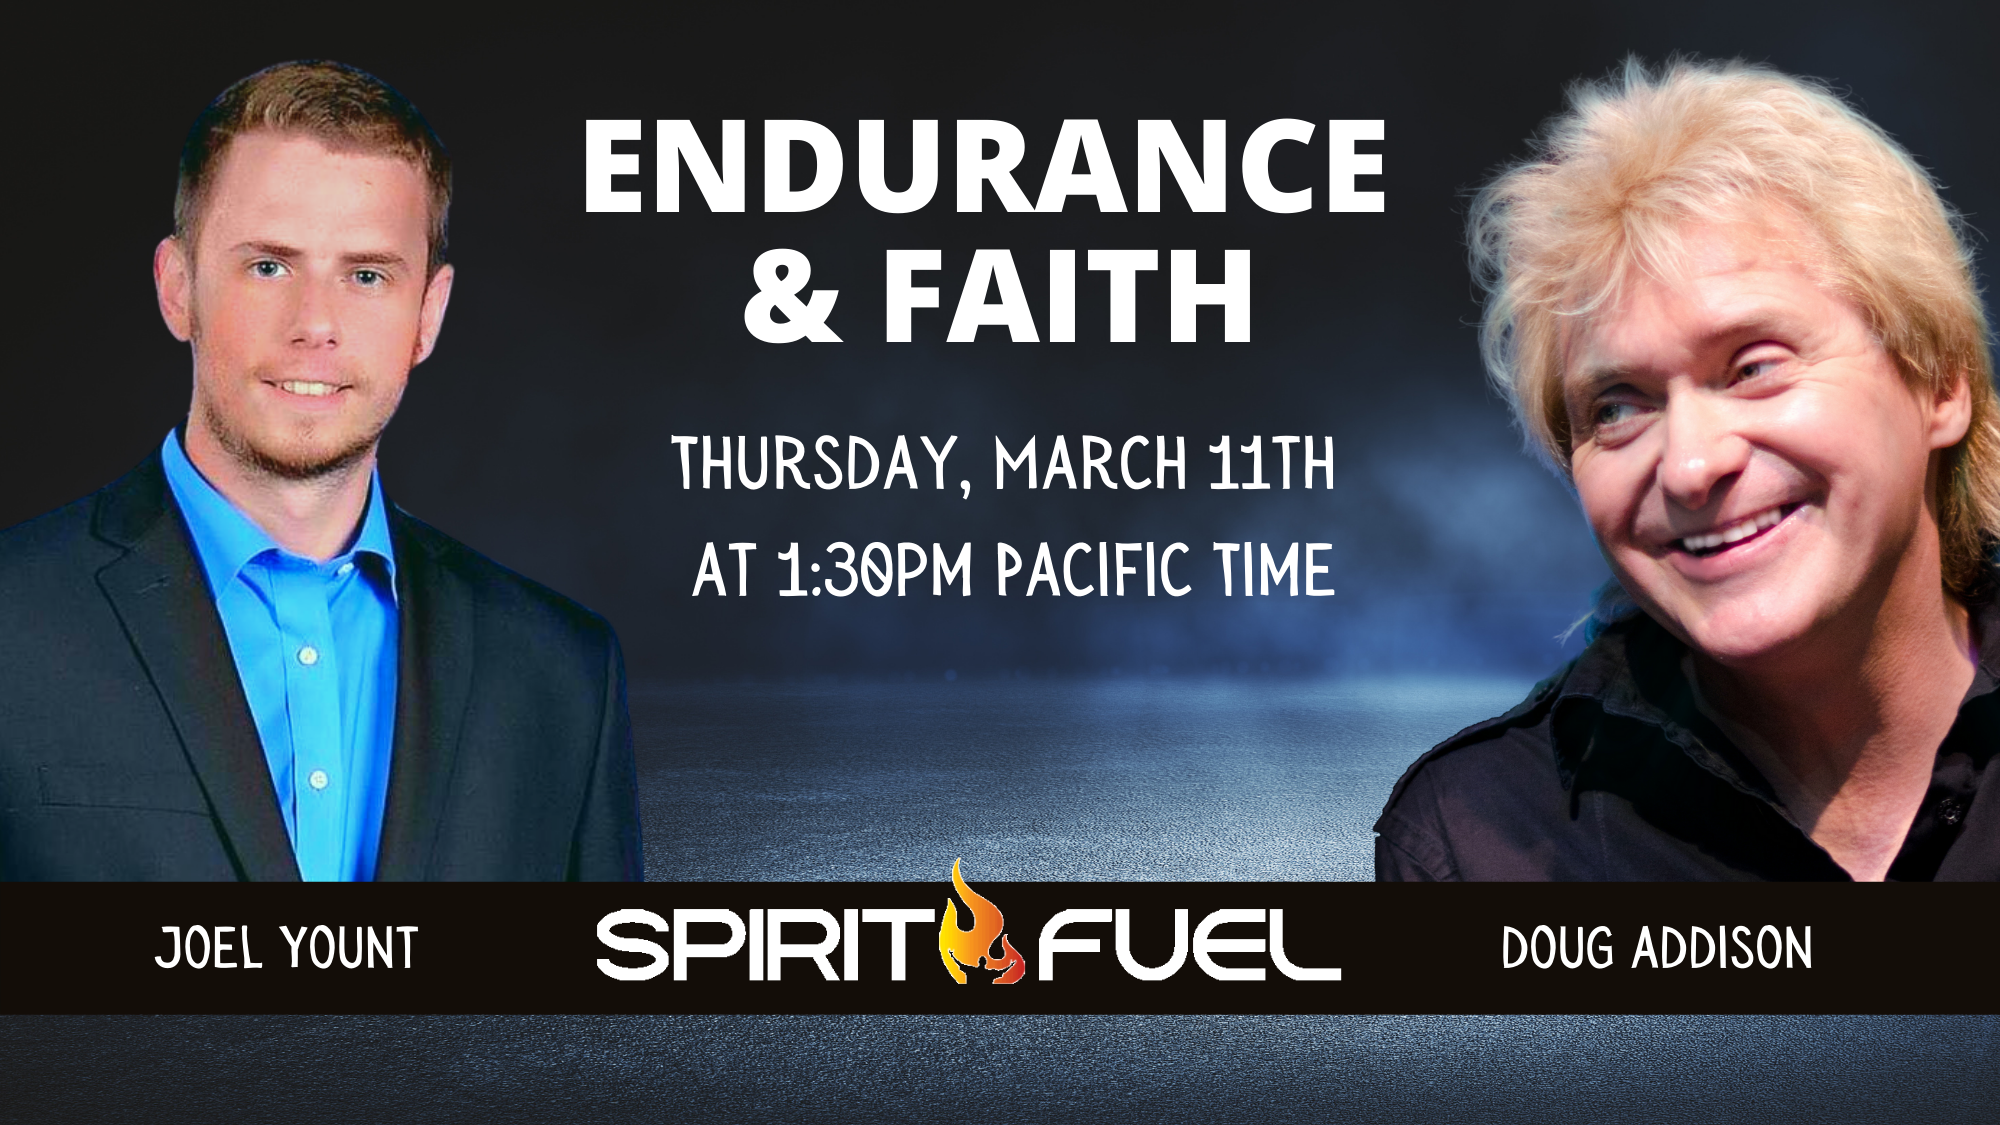 FB LIVE with Joel Yount and Doug Addison on Spirit Fuel